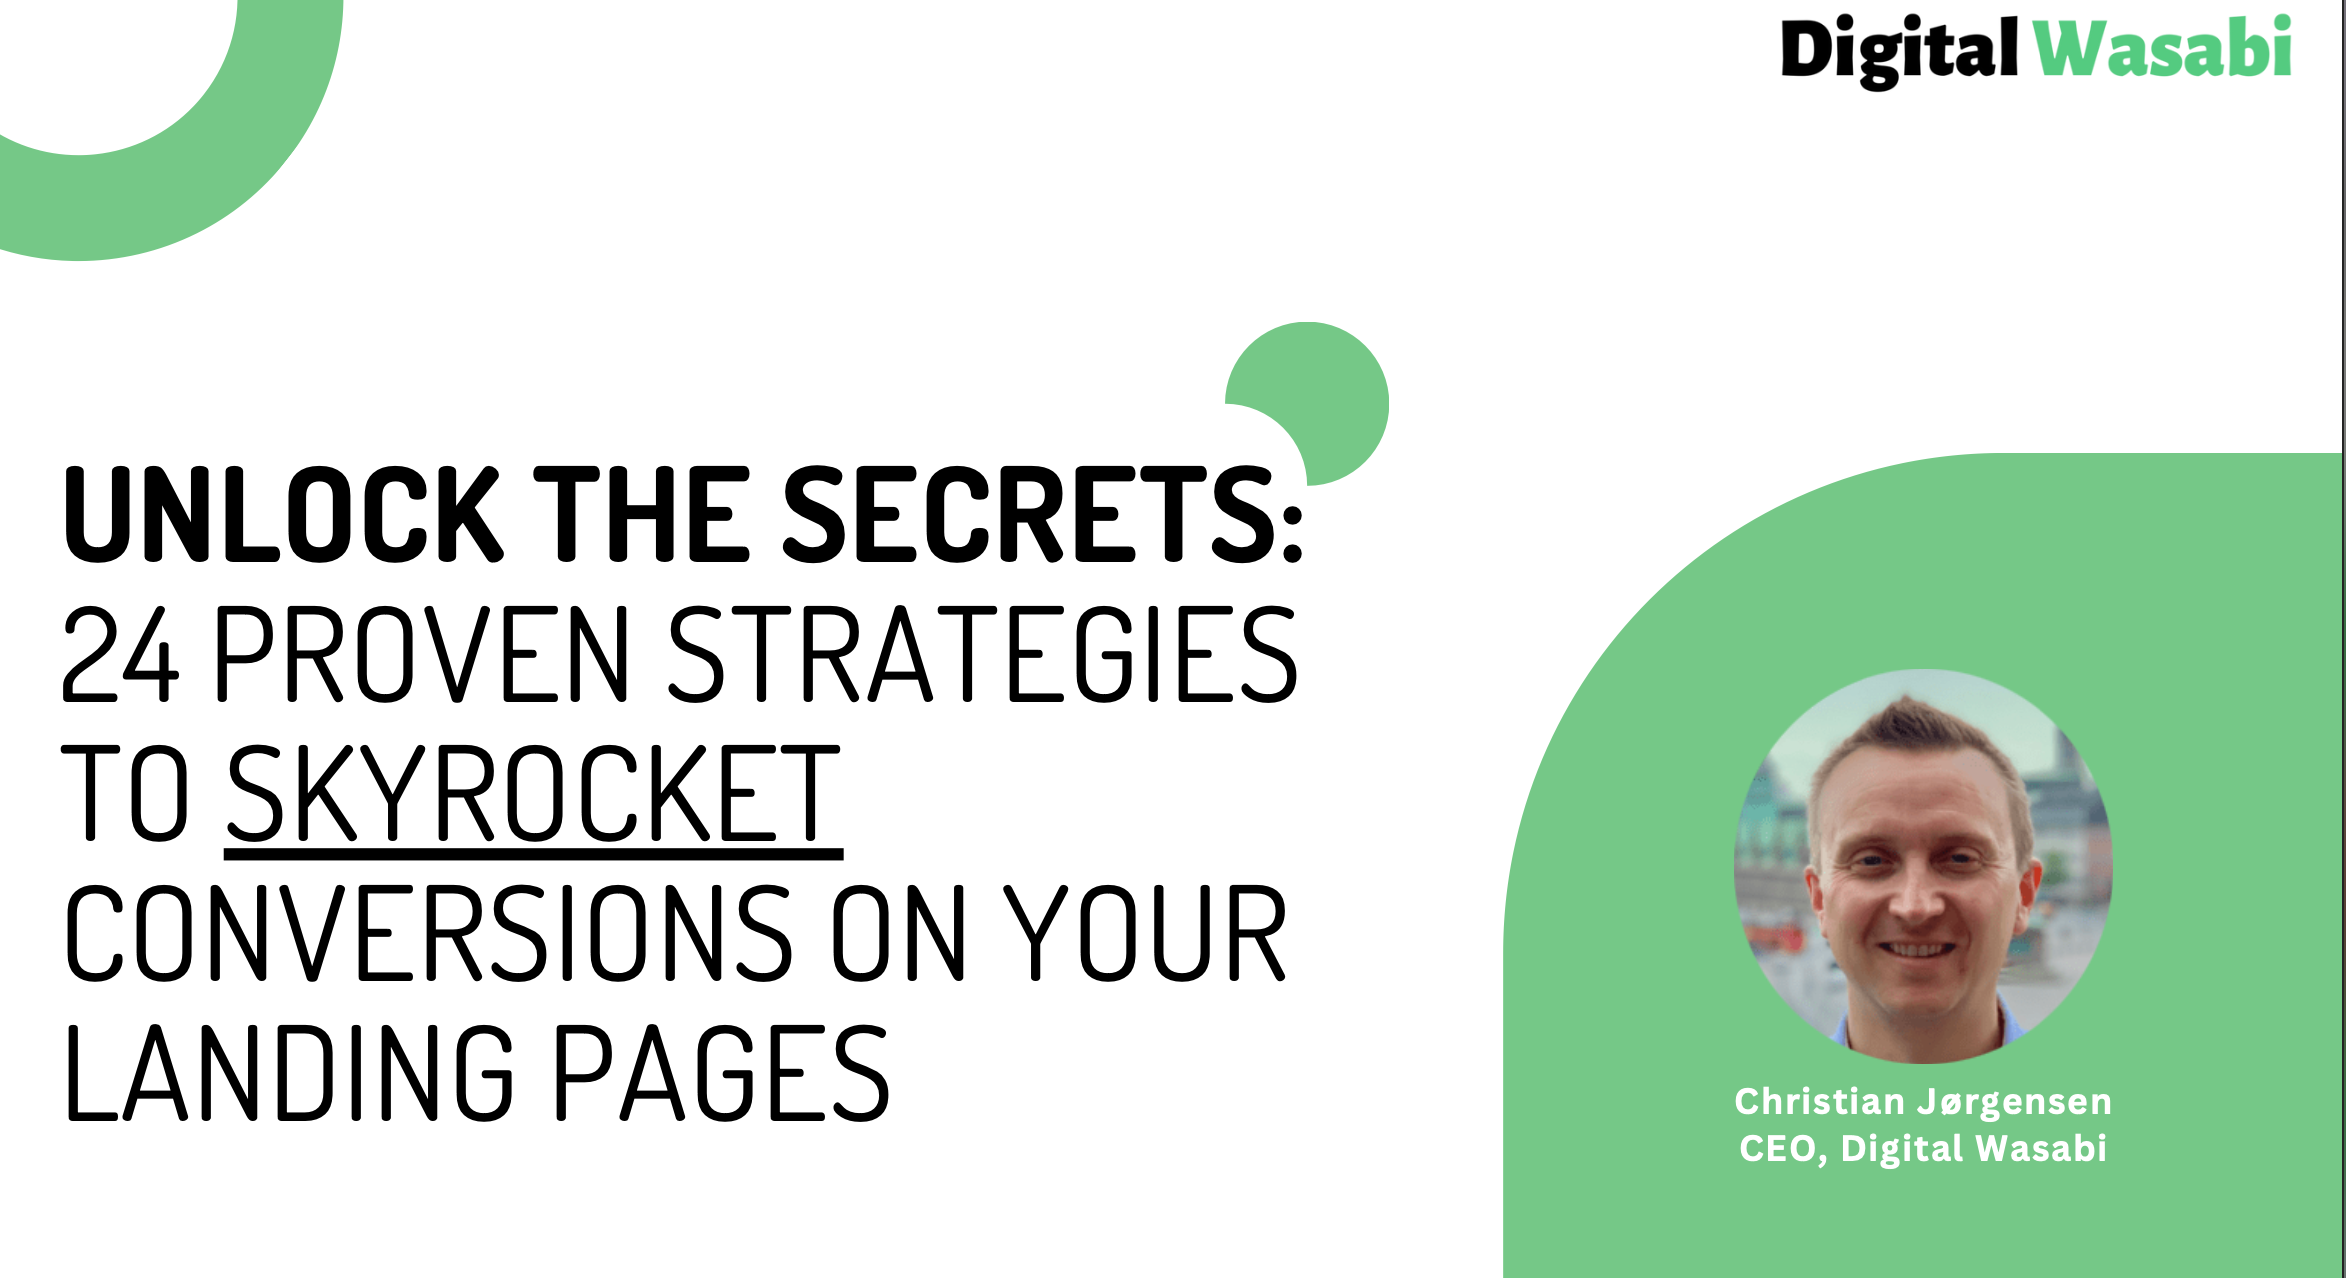 Unlock the Secrets: 24 Proven Strategies To Skyrocket Conversions on Your Landing Pages